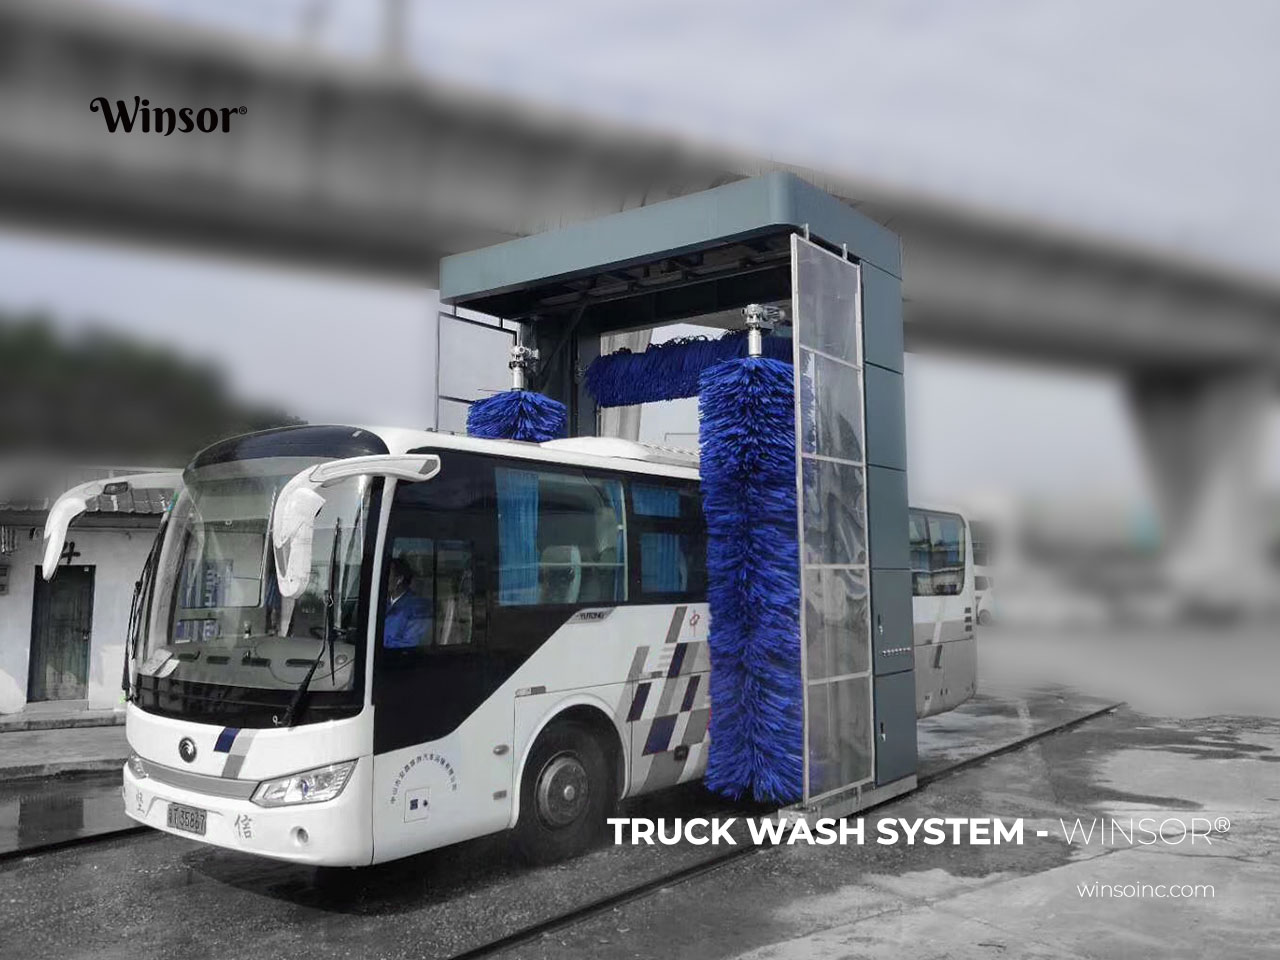 Mobile Truck & Bus Wash Systems from Transport Wash Systems.